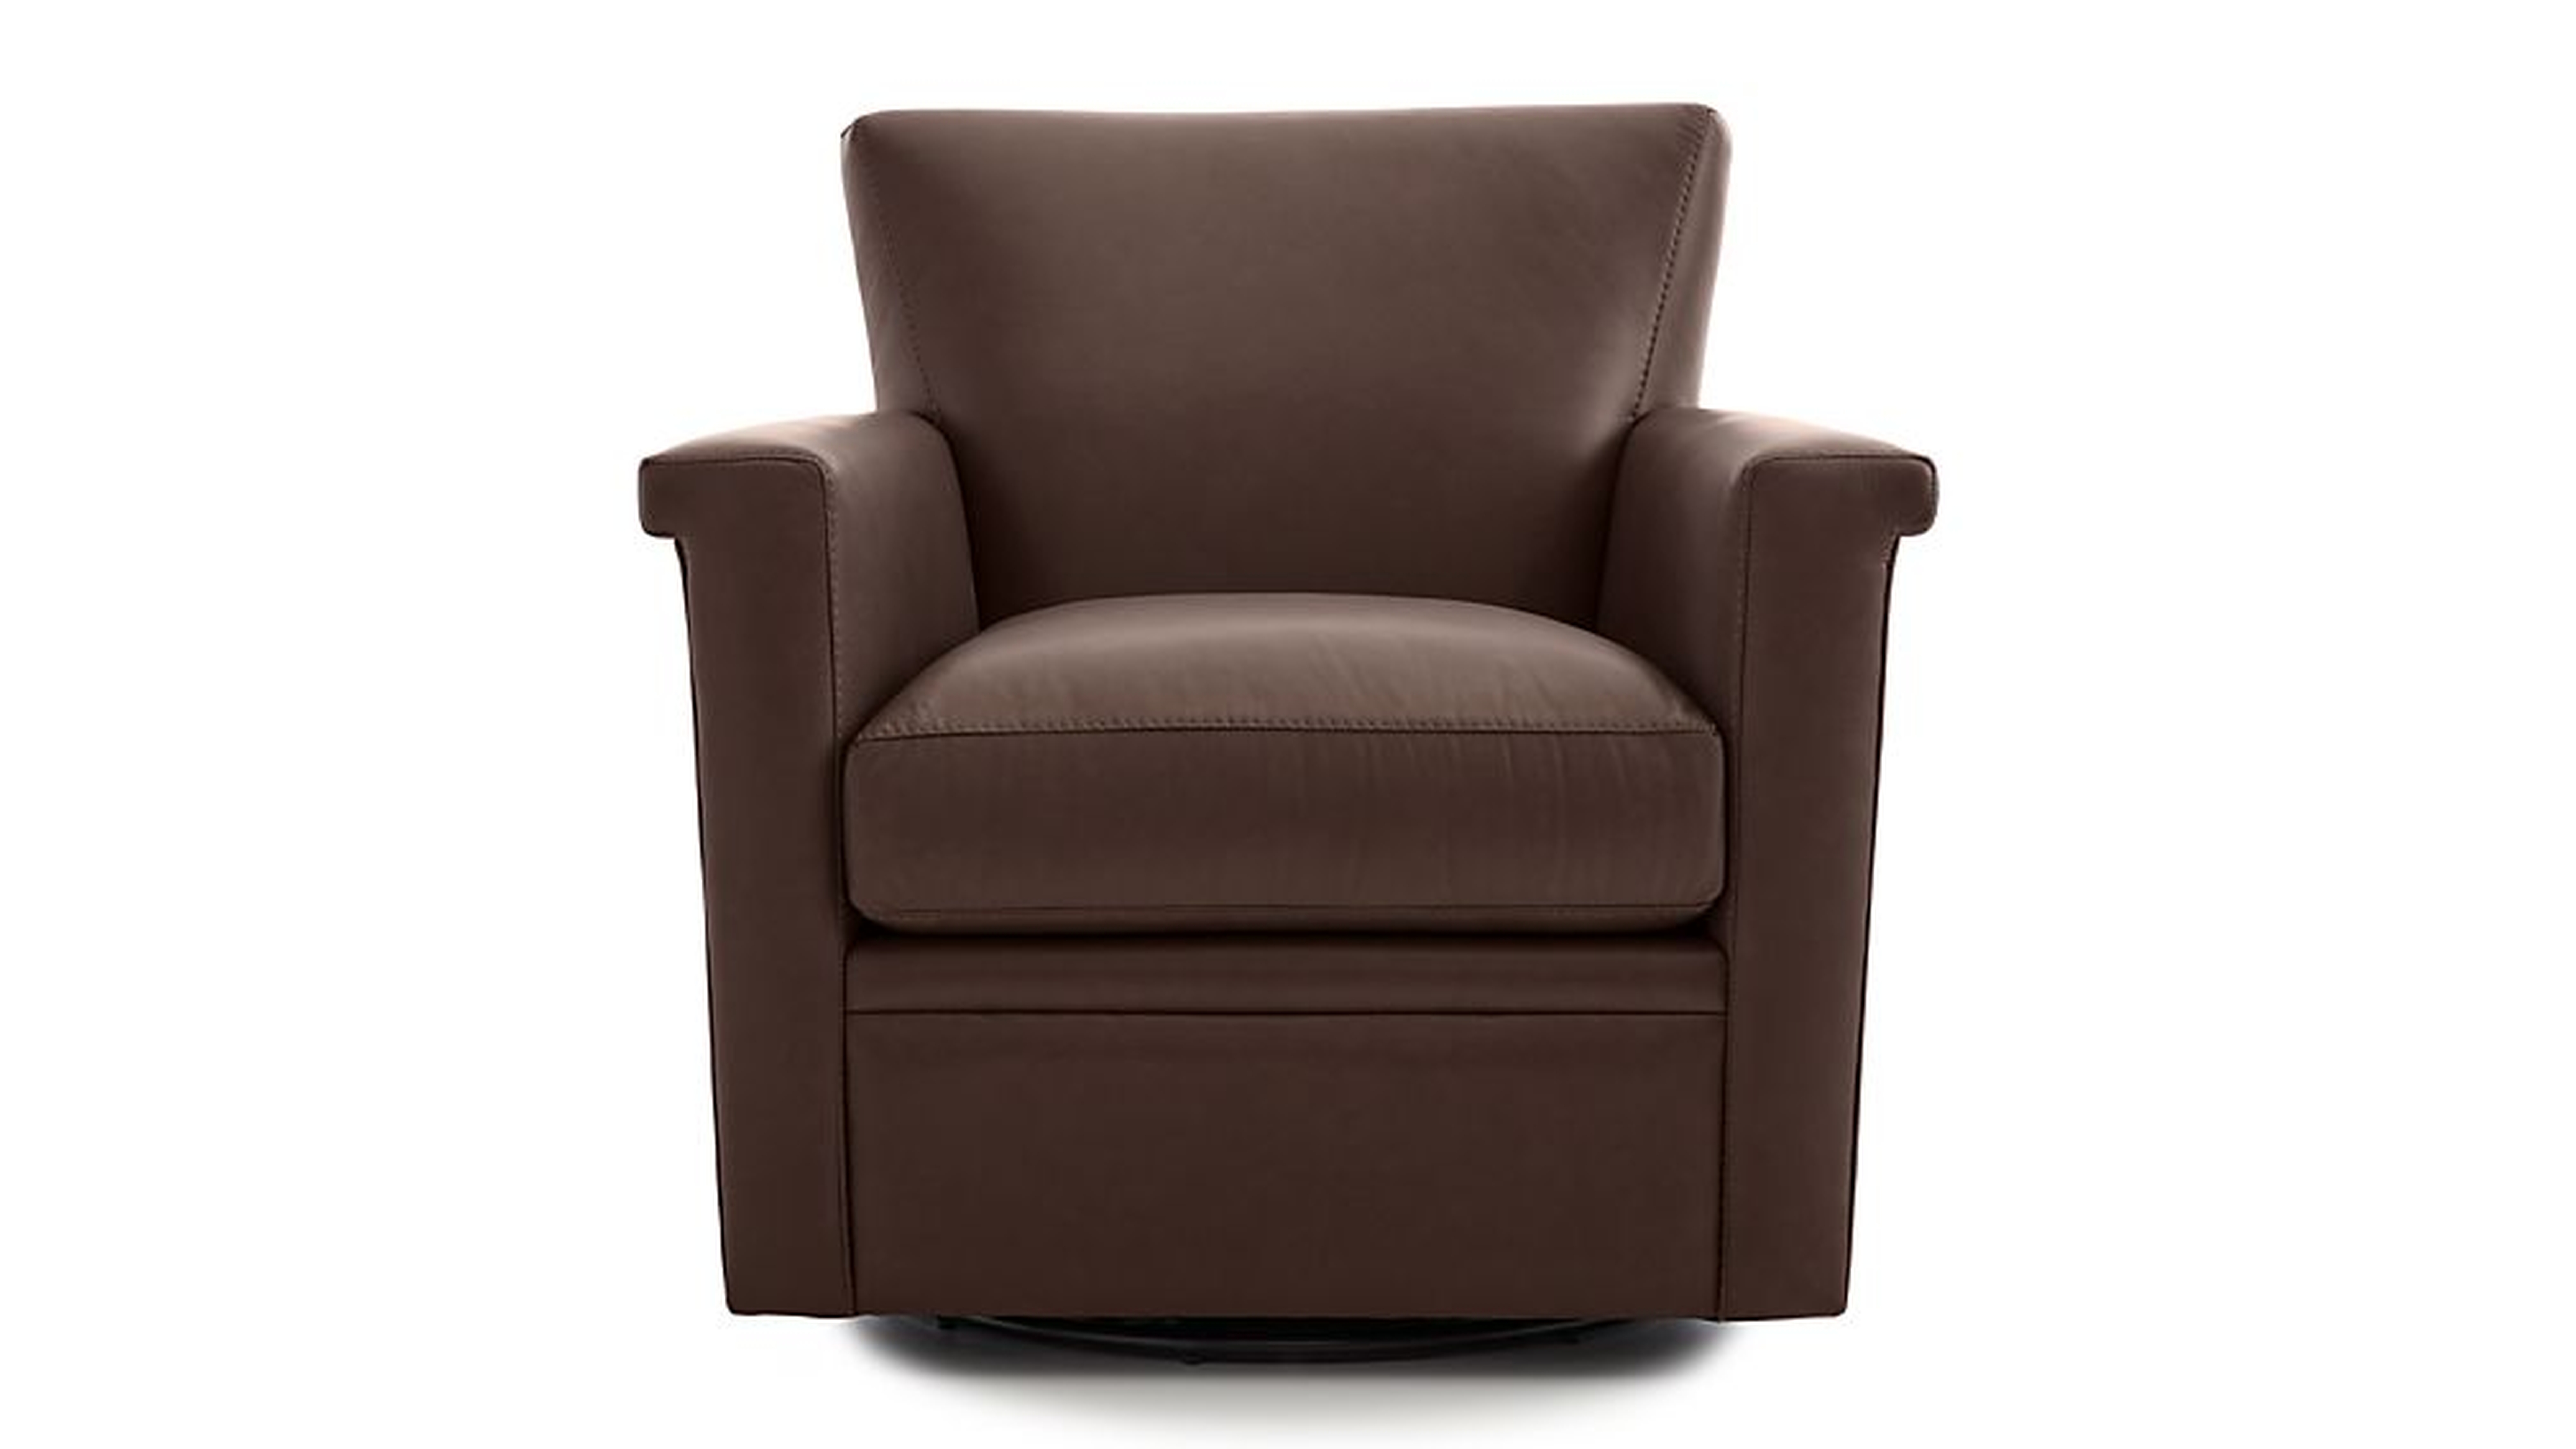 Declan Leather 360 Swivel Chair - Crate and Barrel